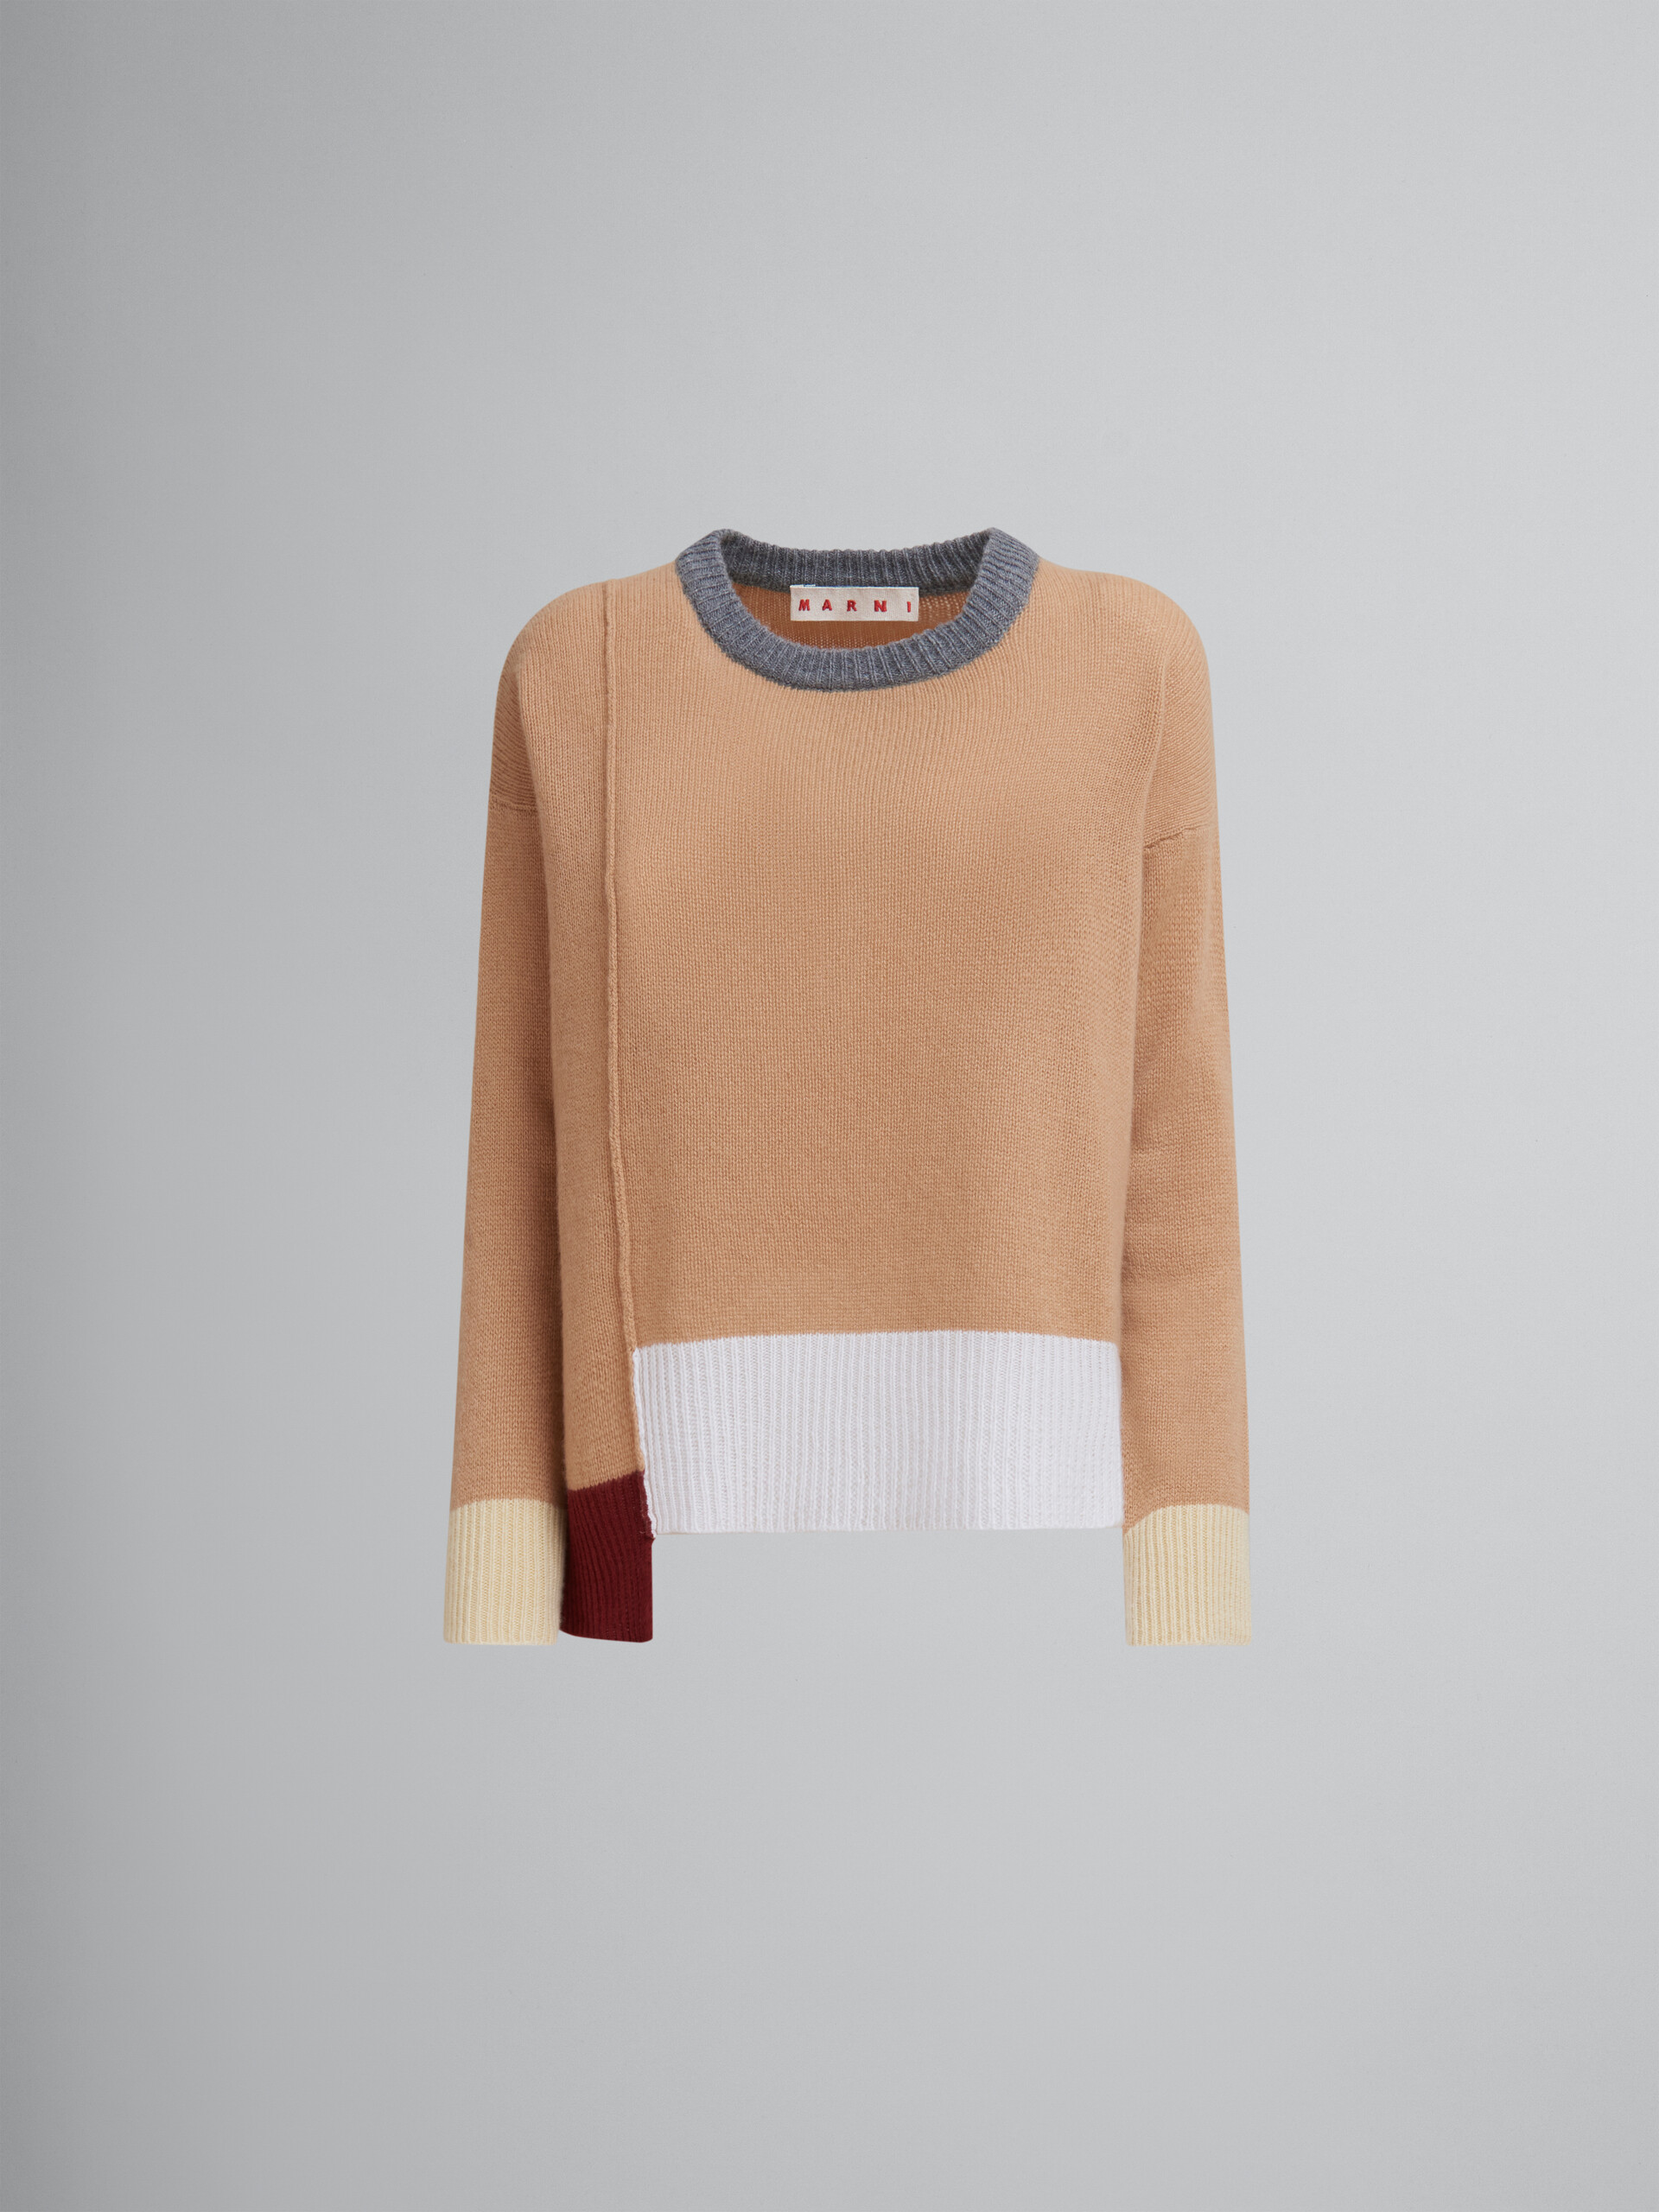  - Pullovers - Image 1